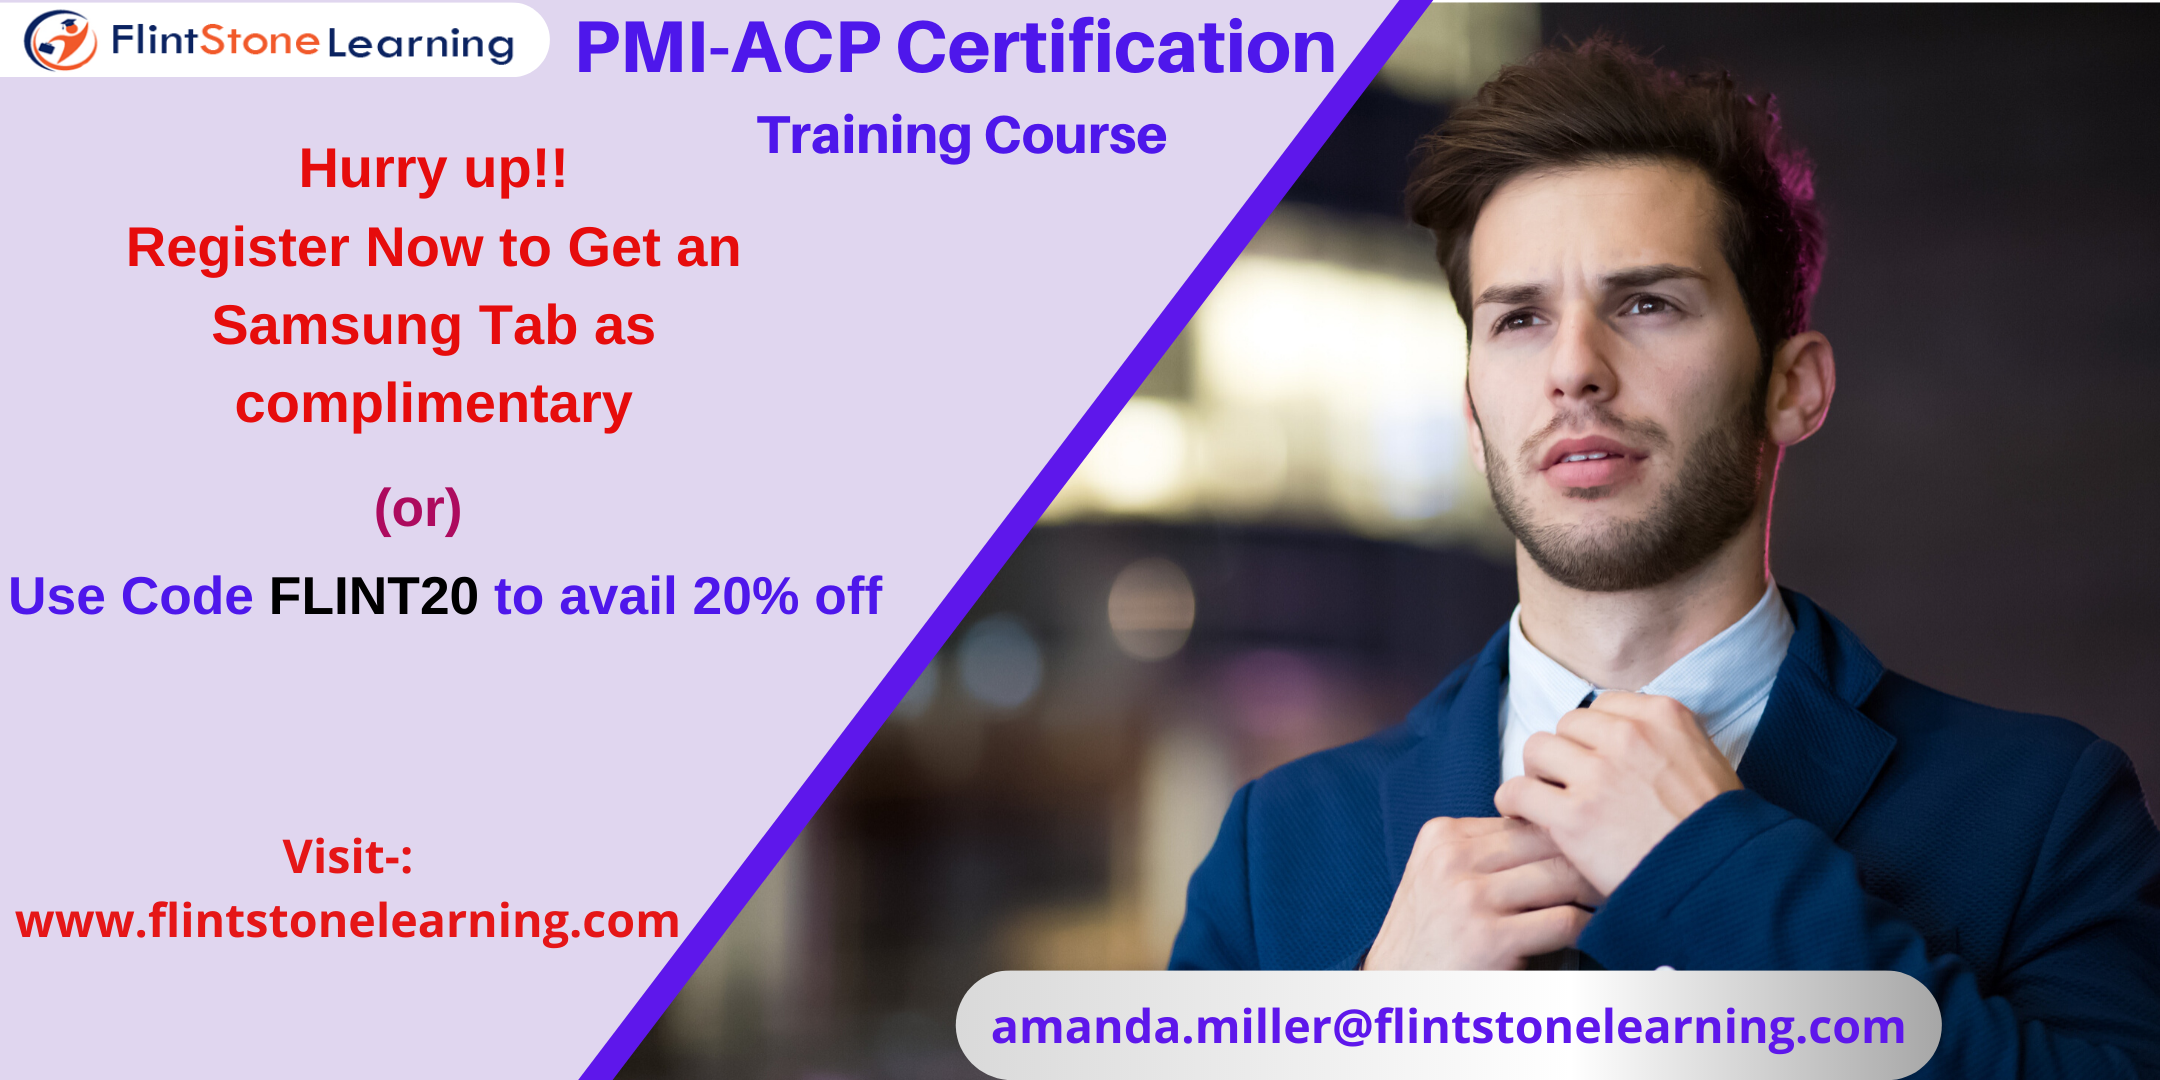 PMI-ACP Certification Training Course in Beverly Hills, CA